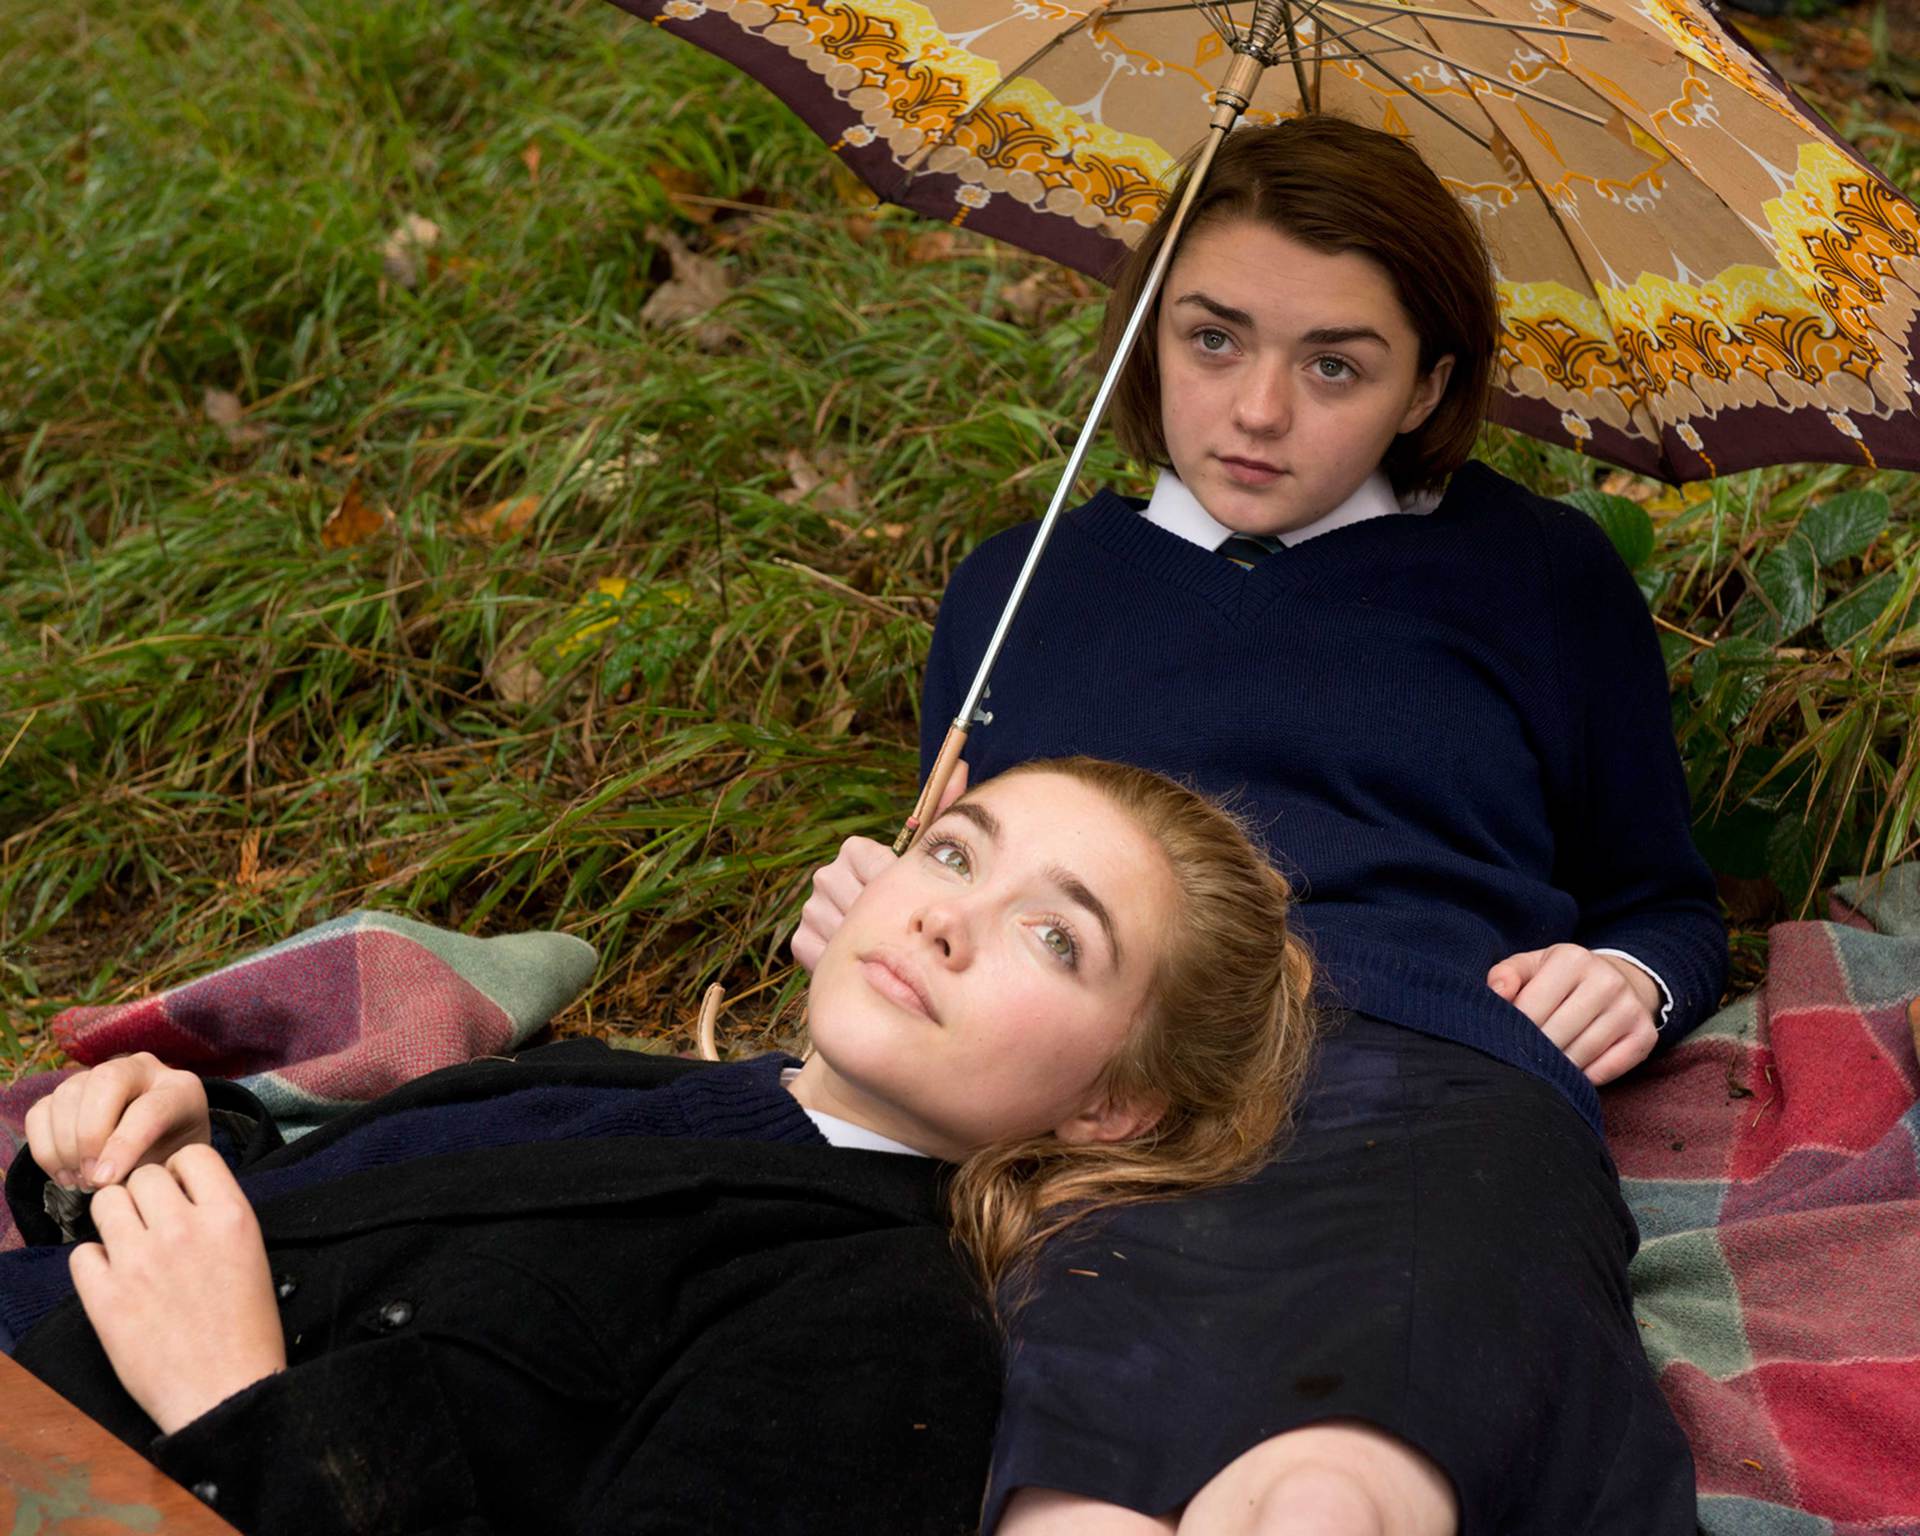 Maisie Williams and Florence Pugh in a scene from the film